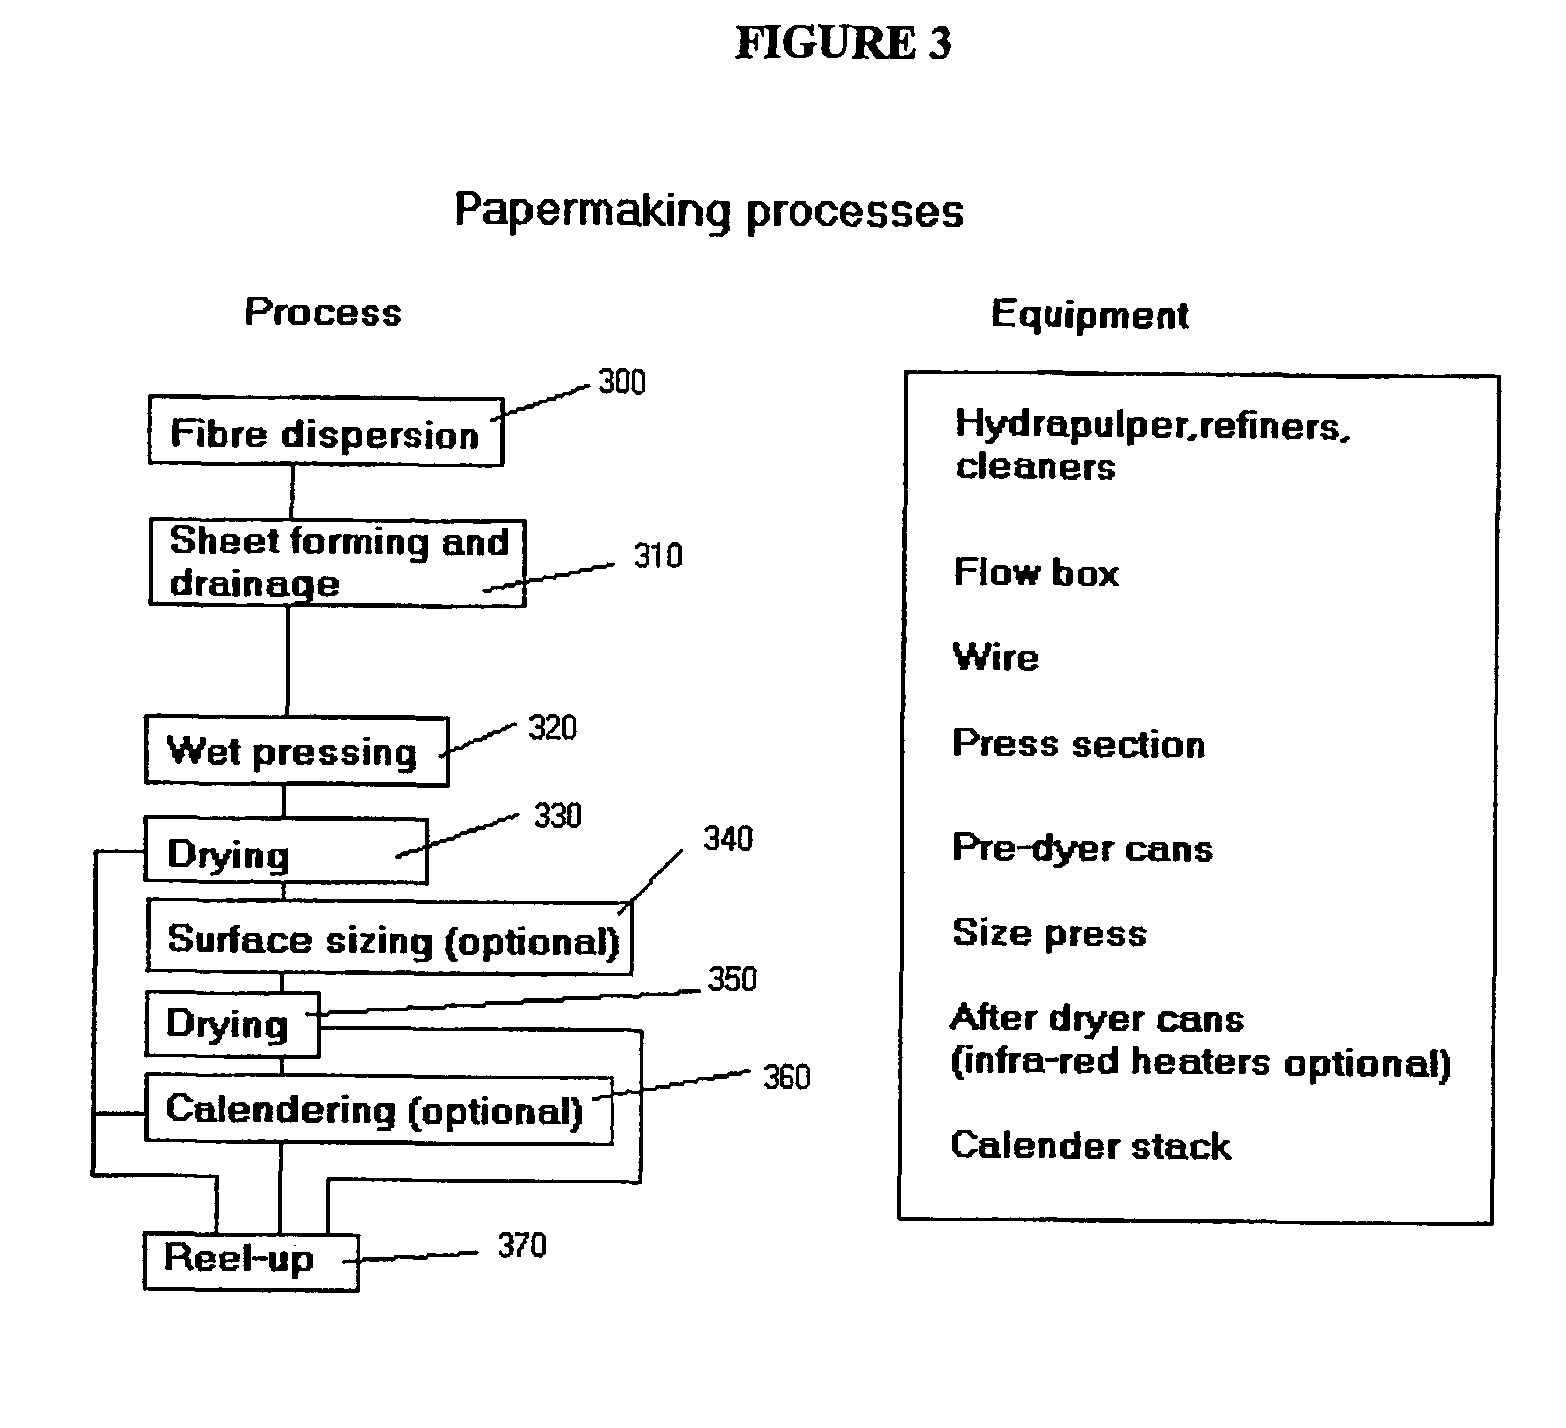 Process for coating paper, paperboard, and molded fiber with a water-dispersible polyester polymer